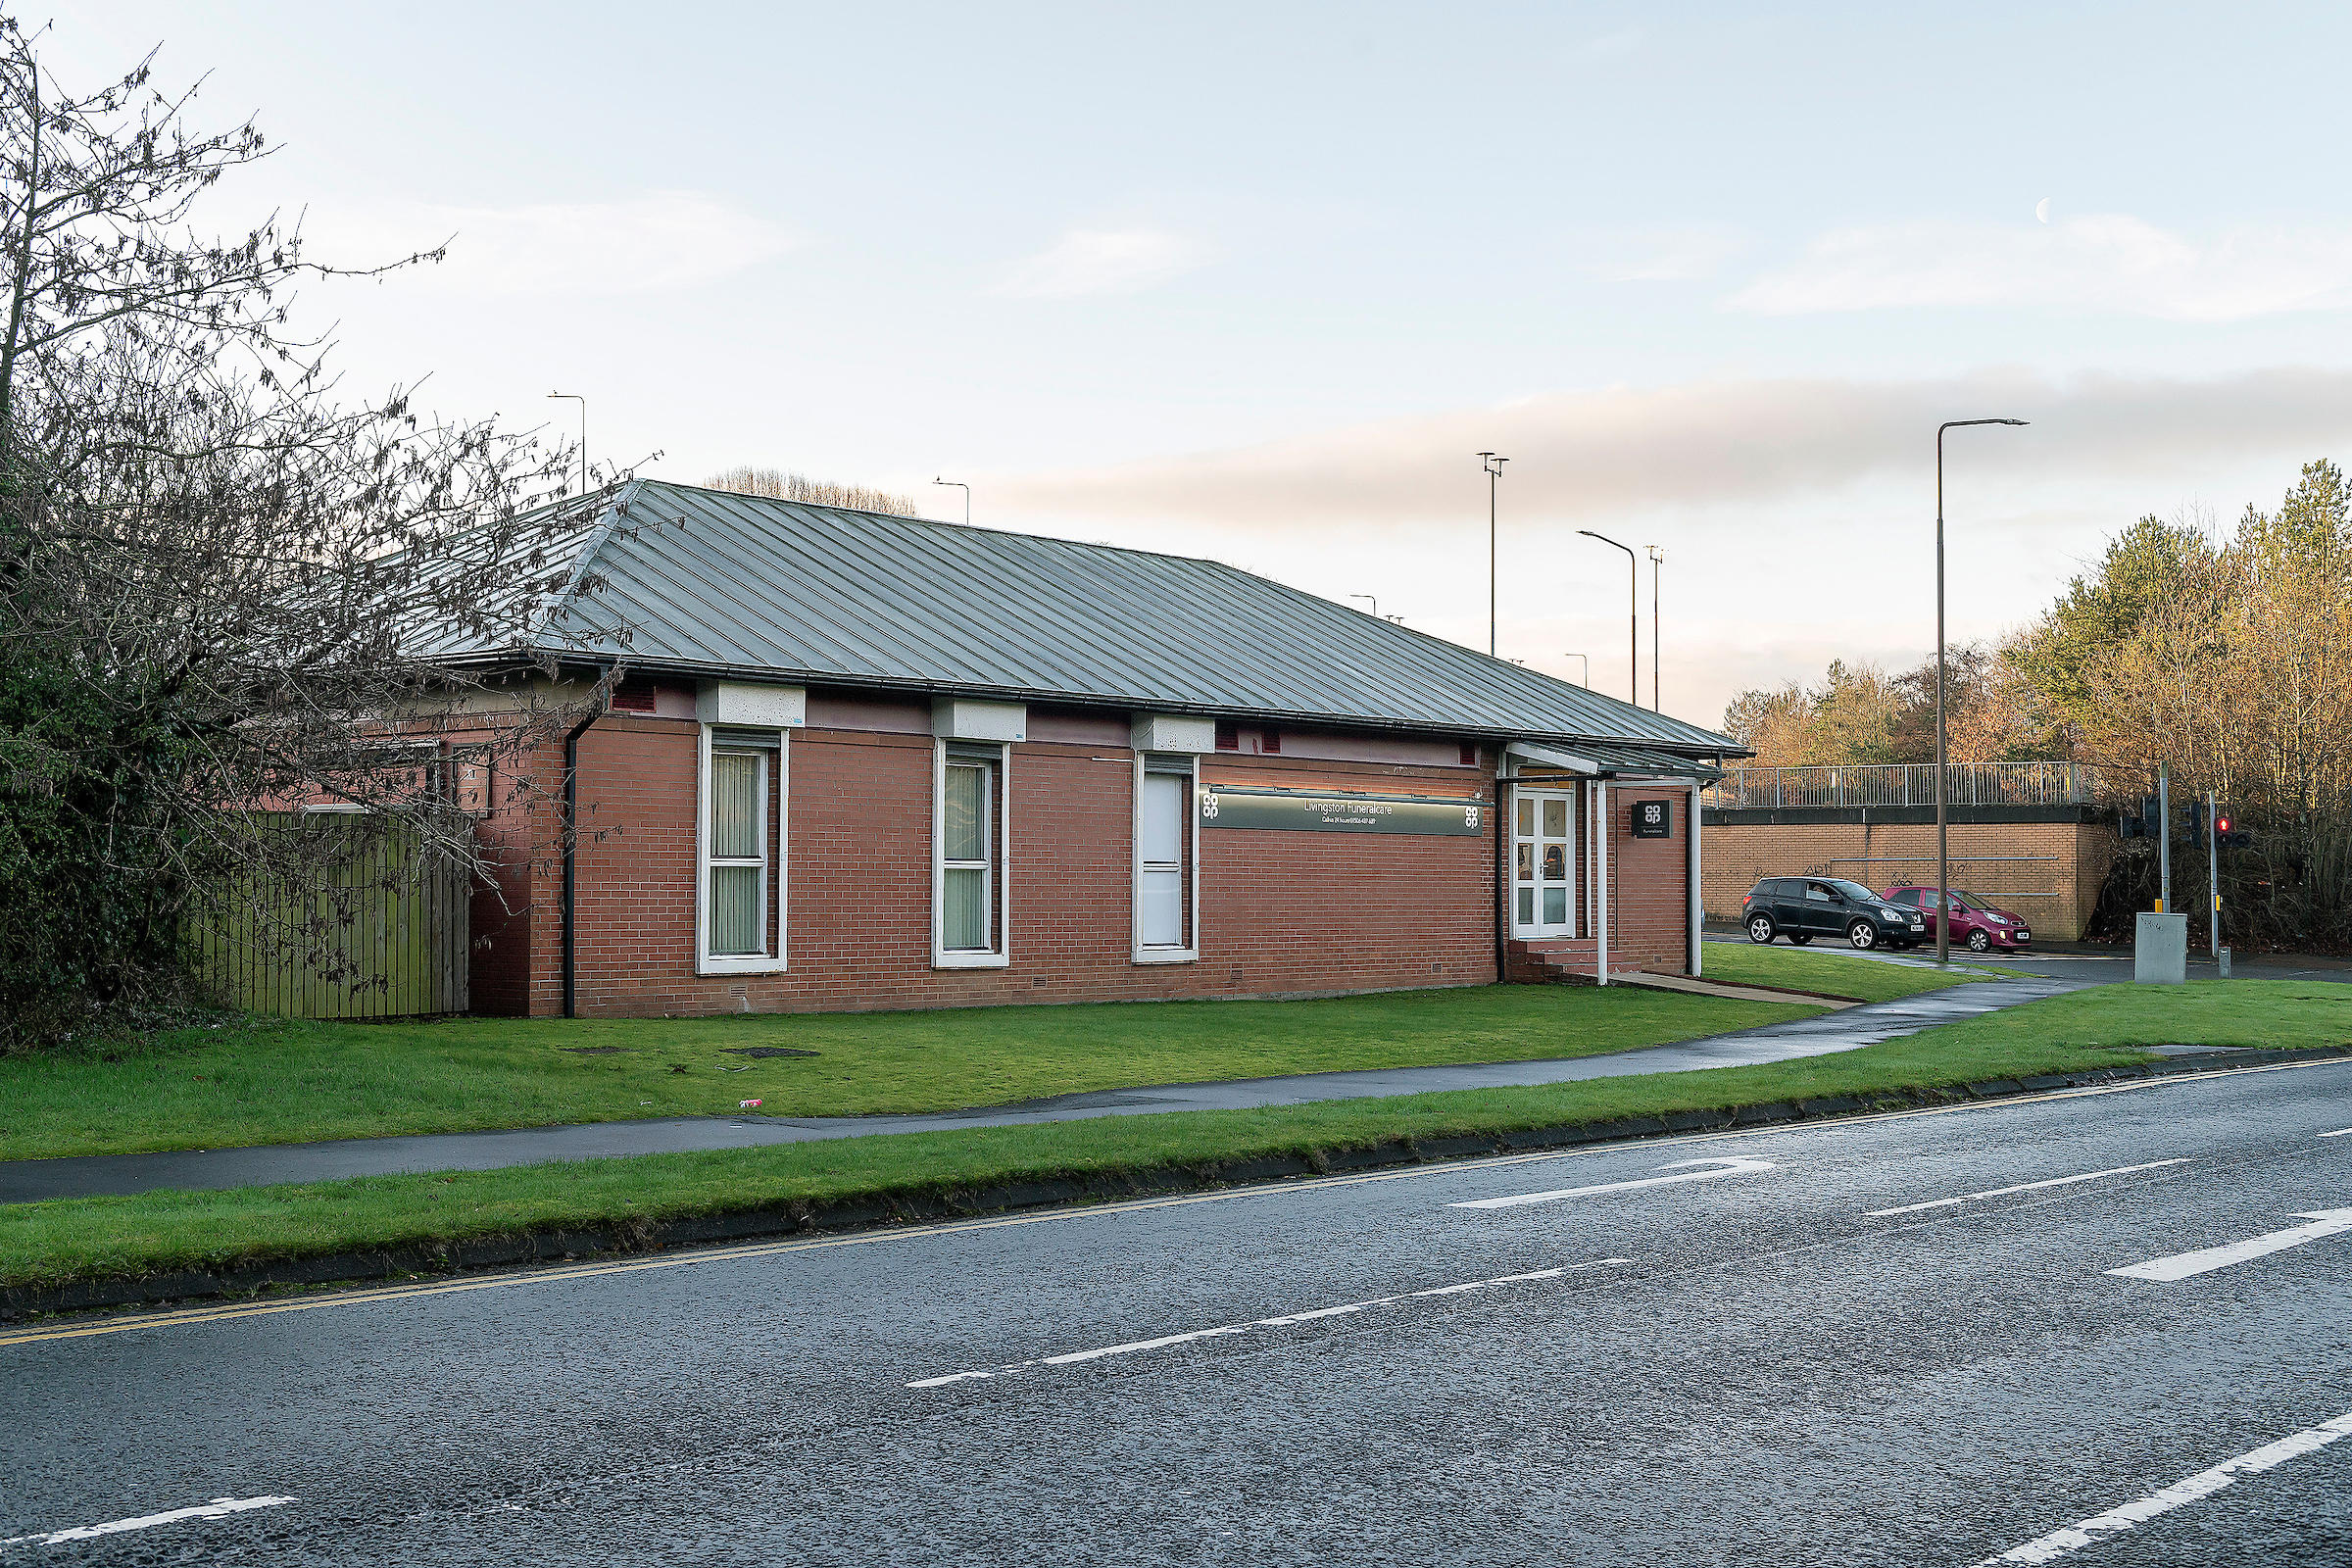 Images Co-op Funeralcare, Livingston